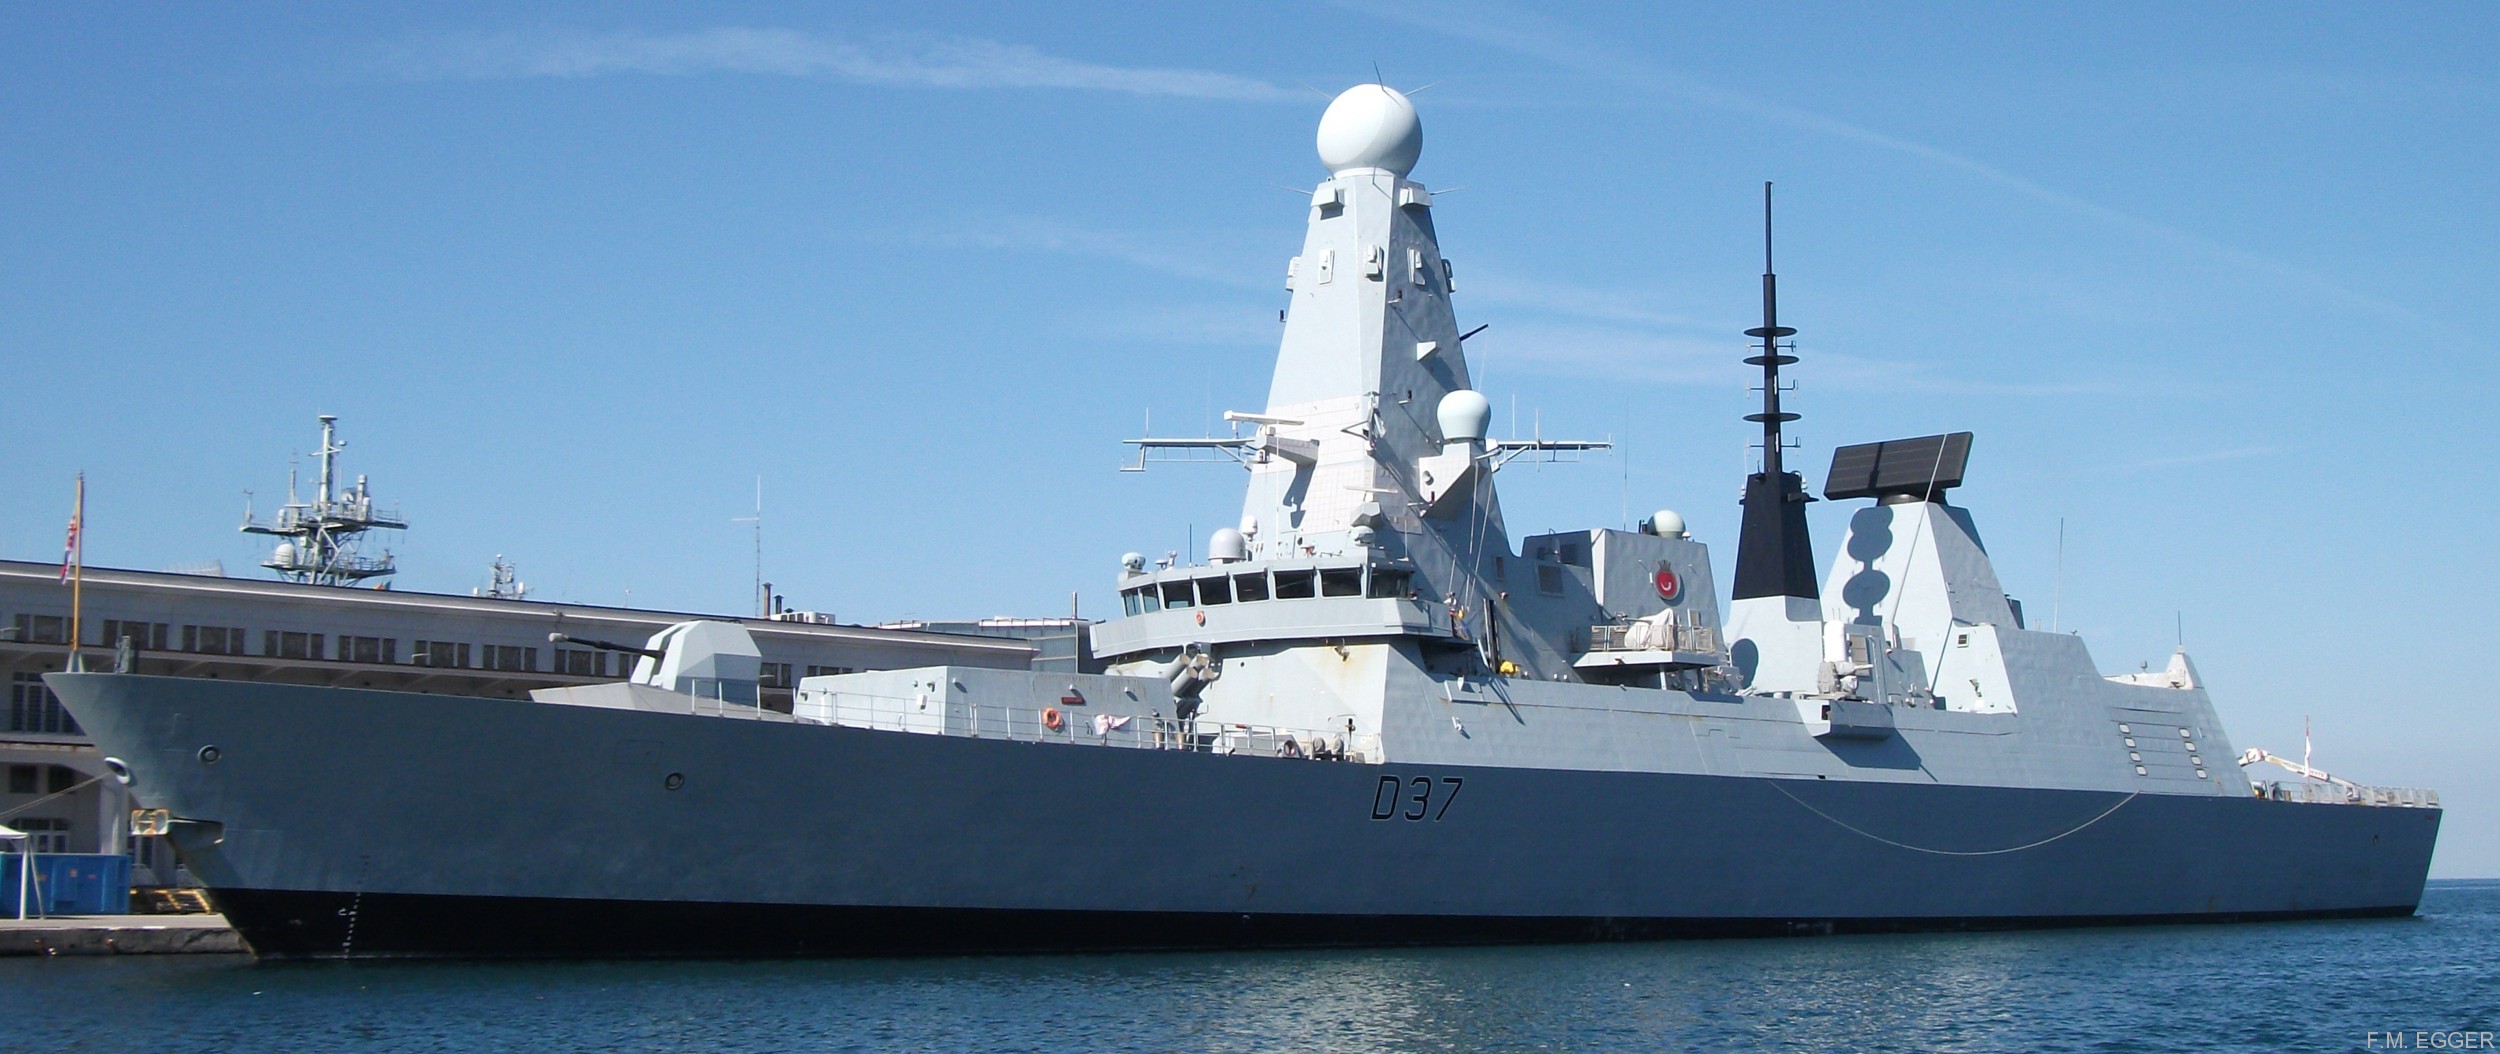 hms duncan d-37 type 45 daring class guided missile destroyer ddg royal navy sea viper paams trieste italy 02